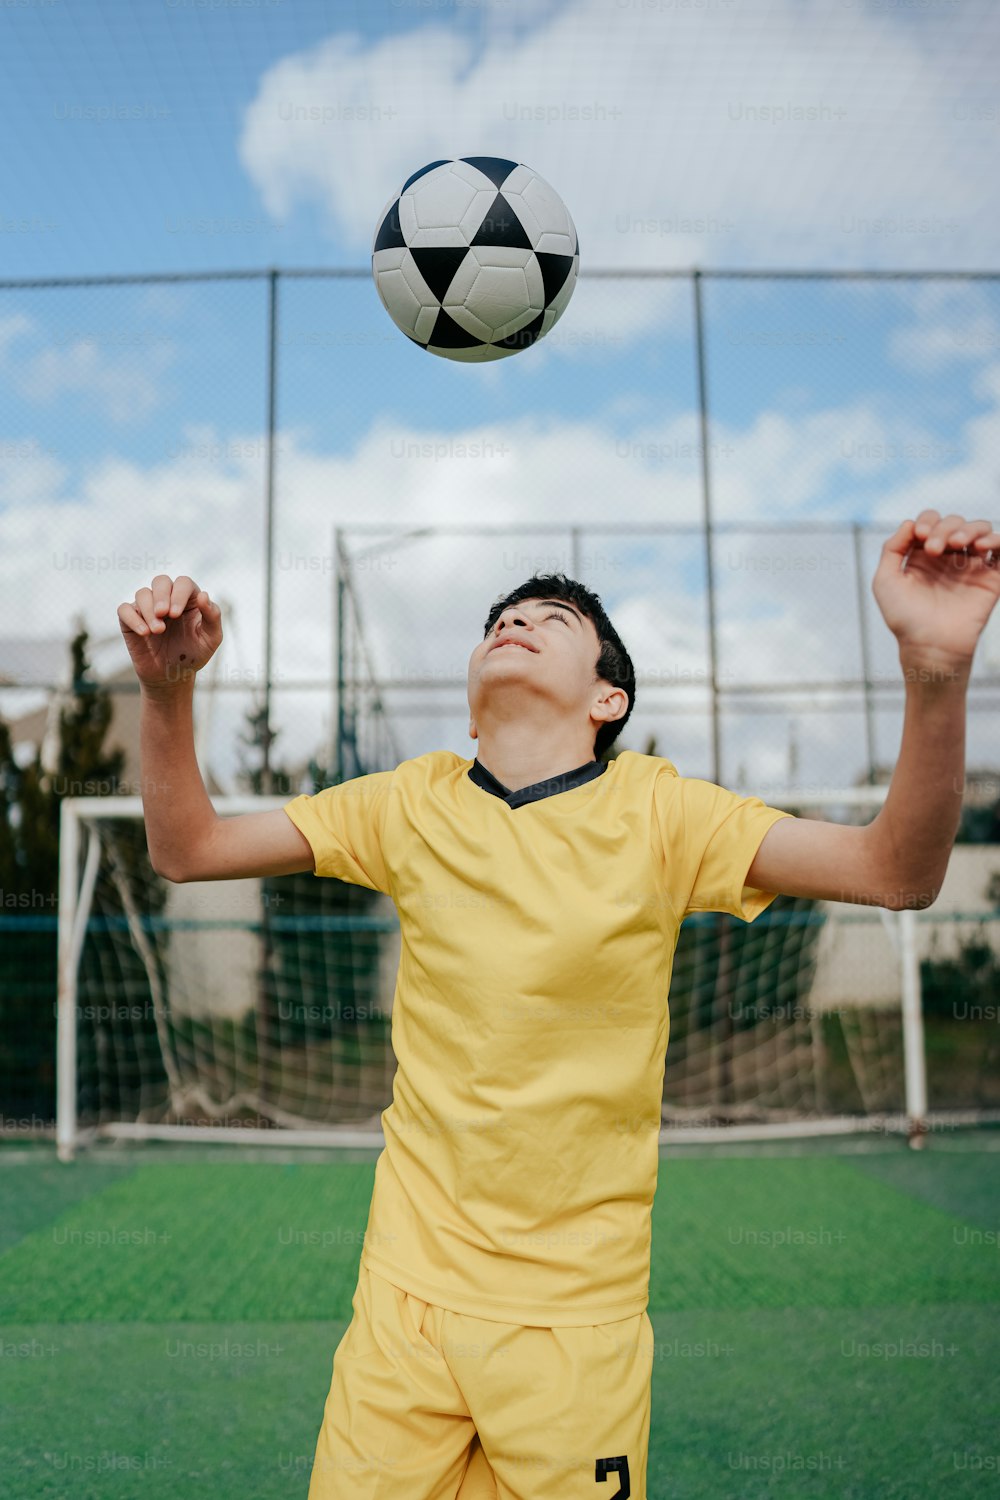 a young man in a yellow uniform reaching up to catch a soccer ball